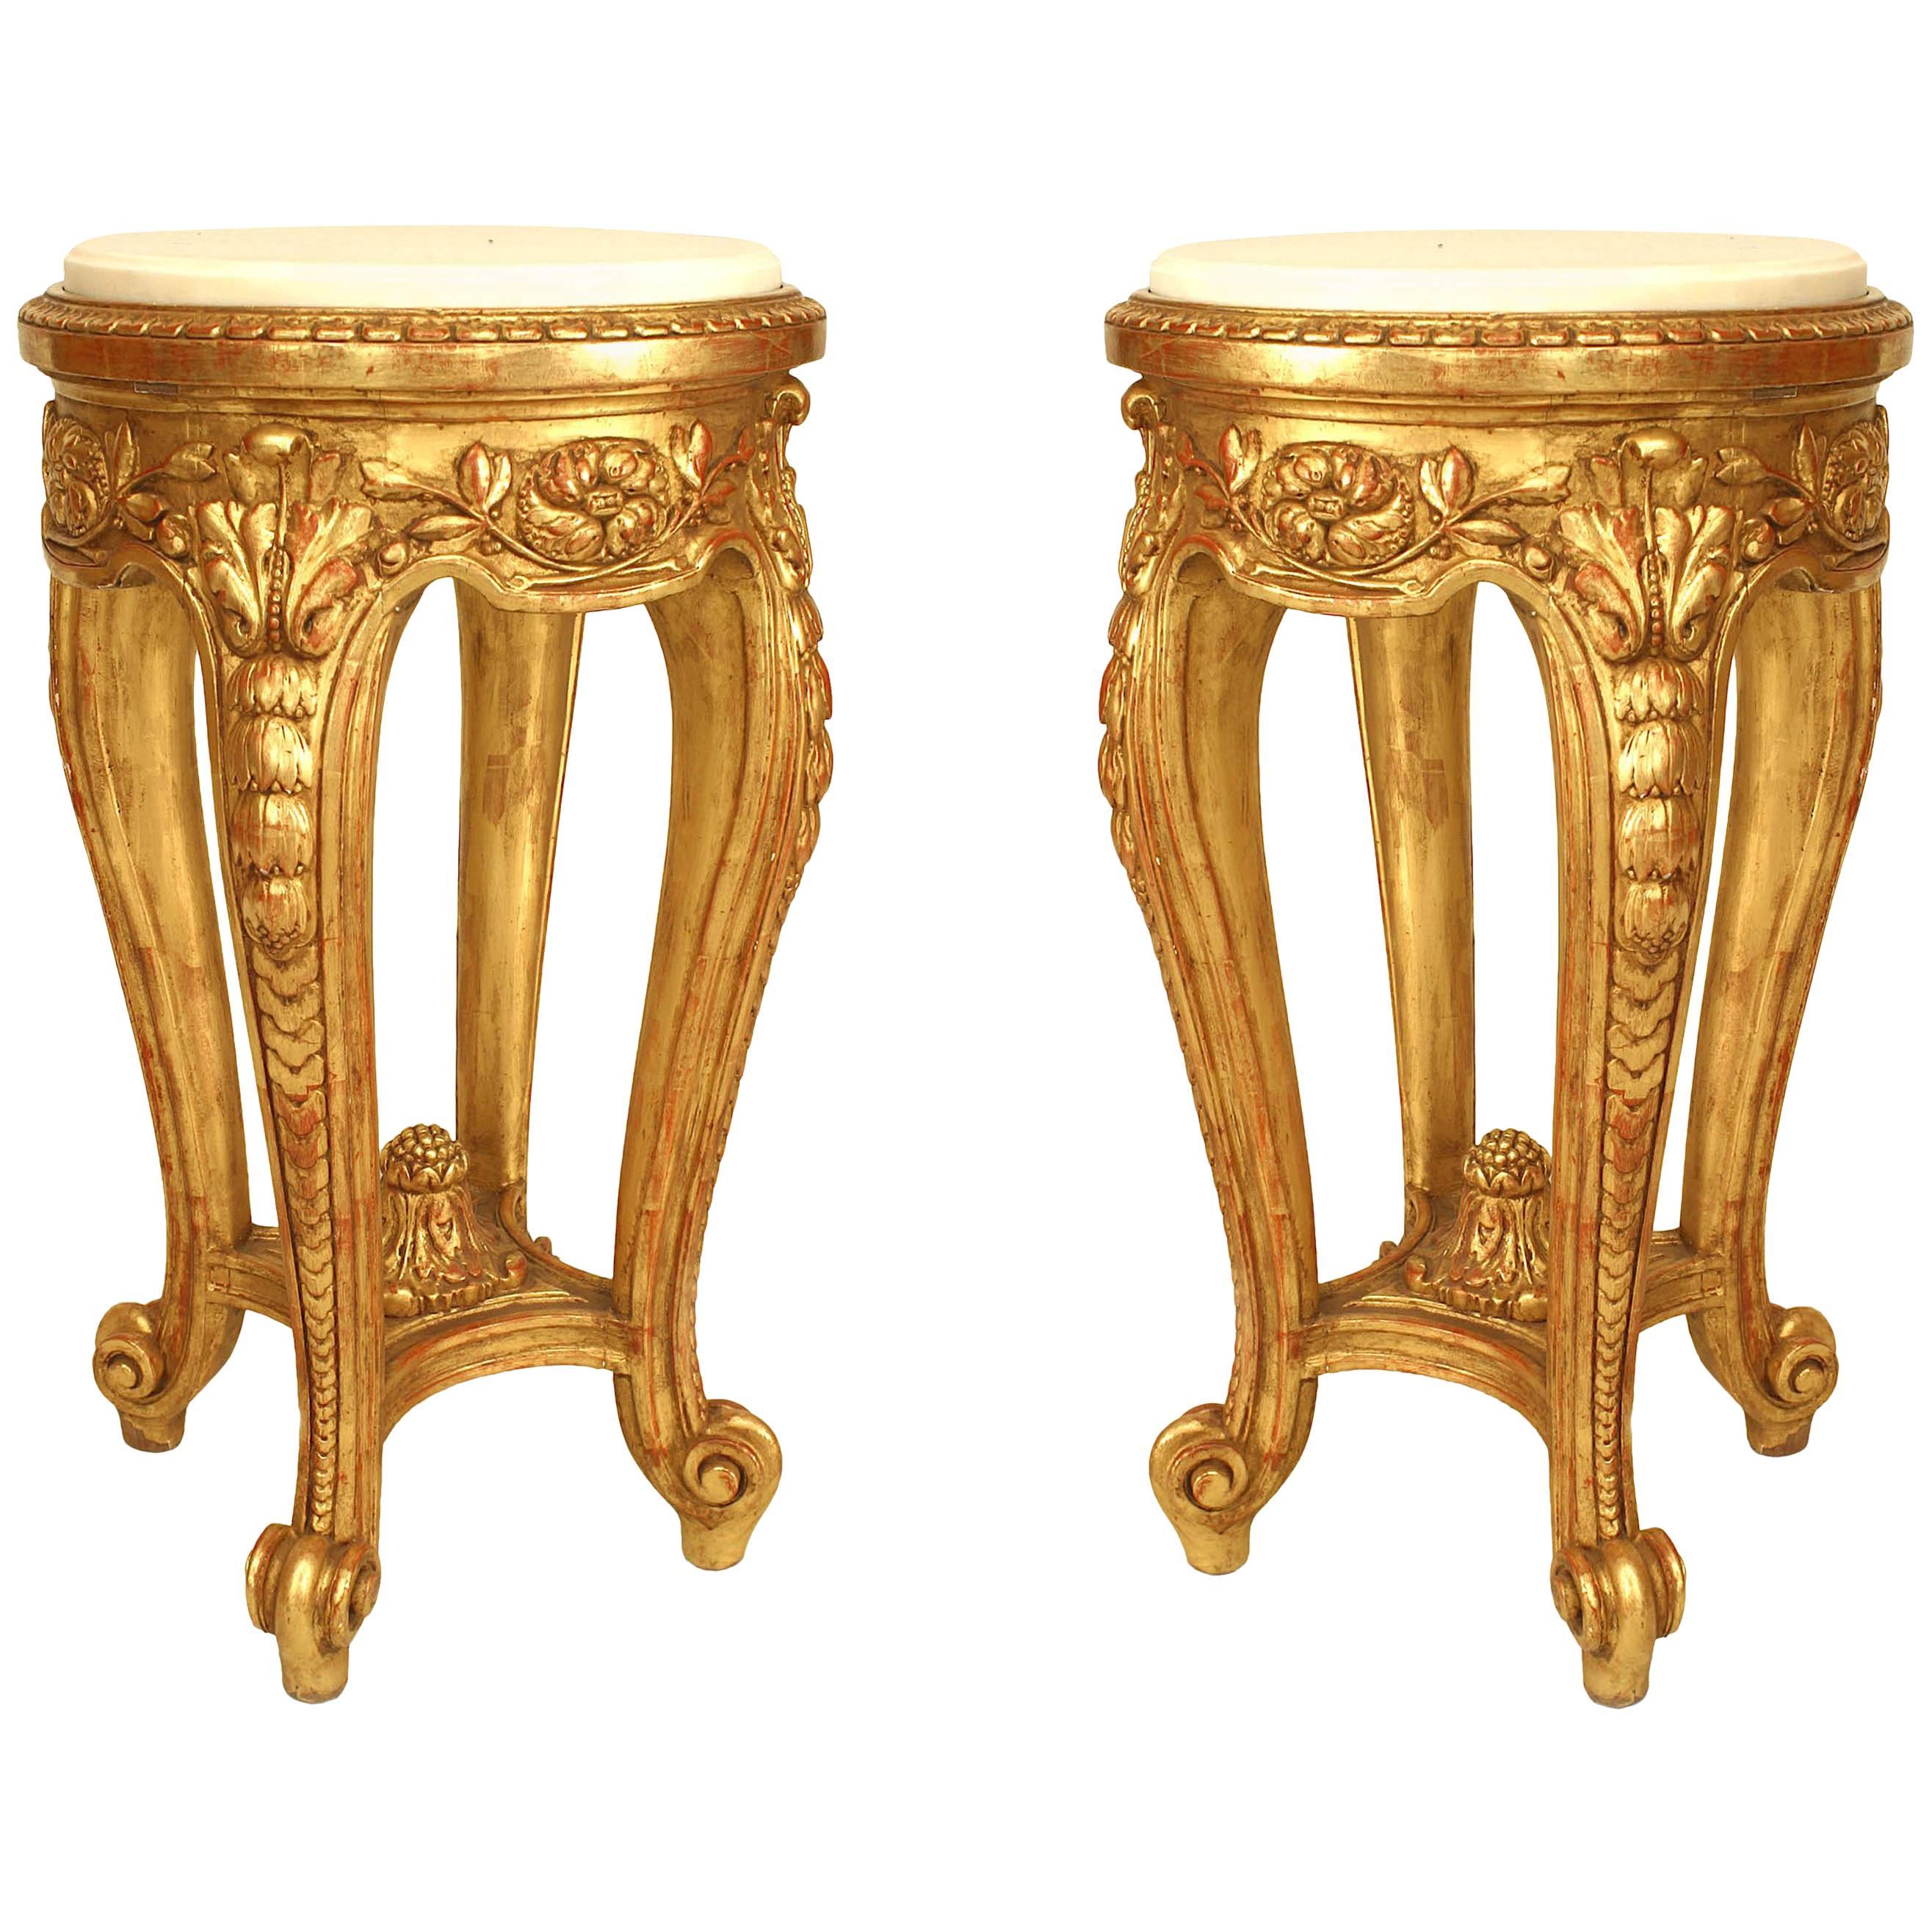 Pair of French Regence Gilt and Marble Top End Tables